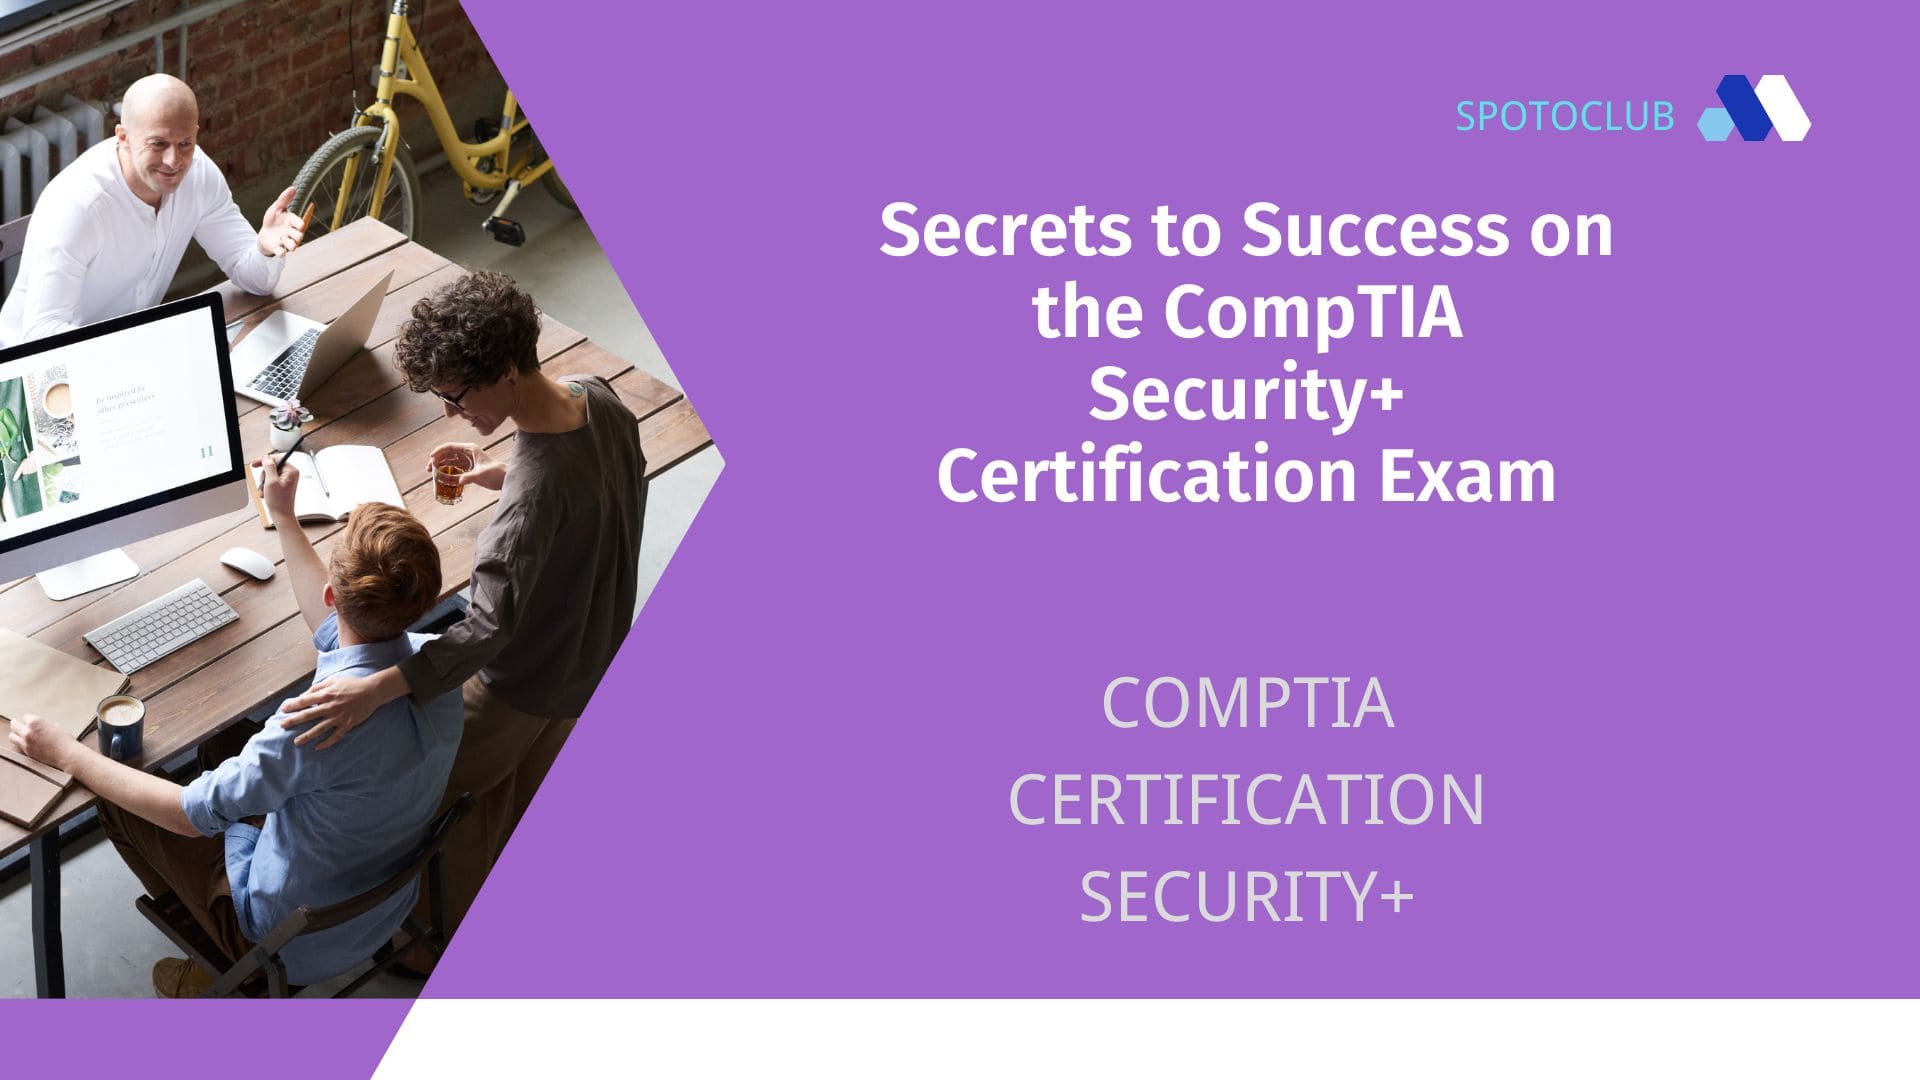 Success on the CompTIA Security+